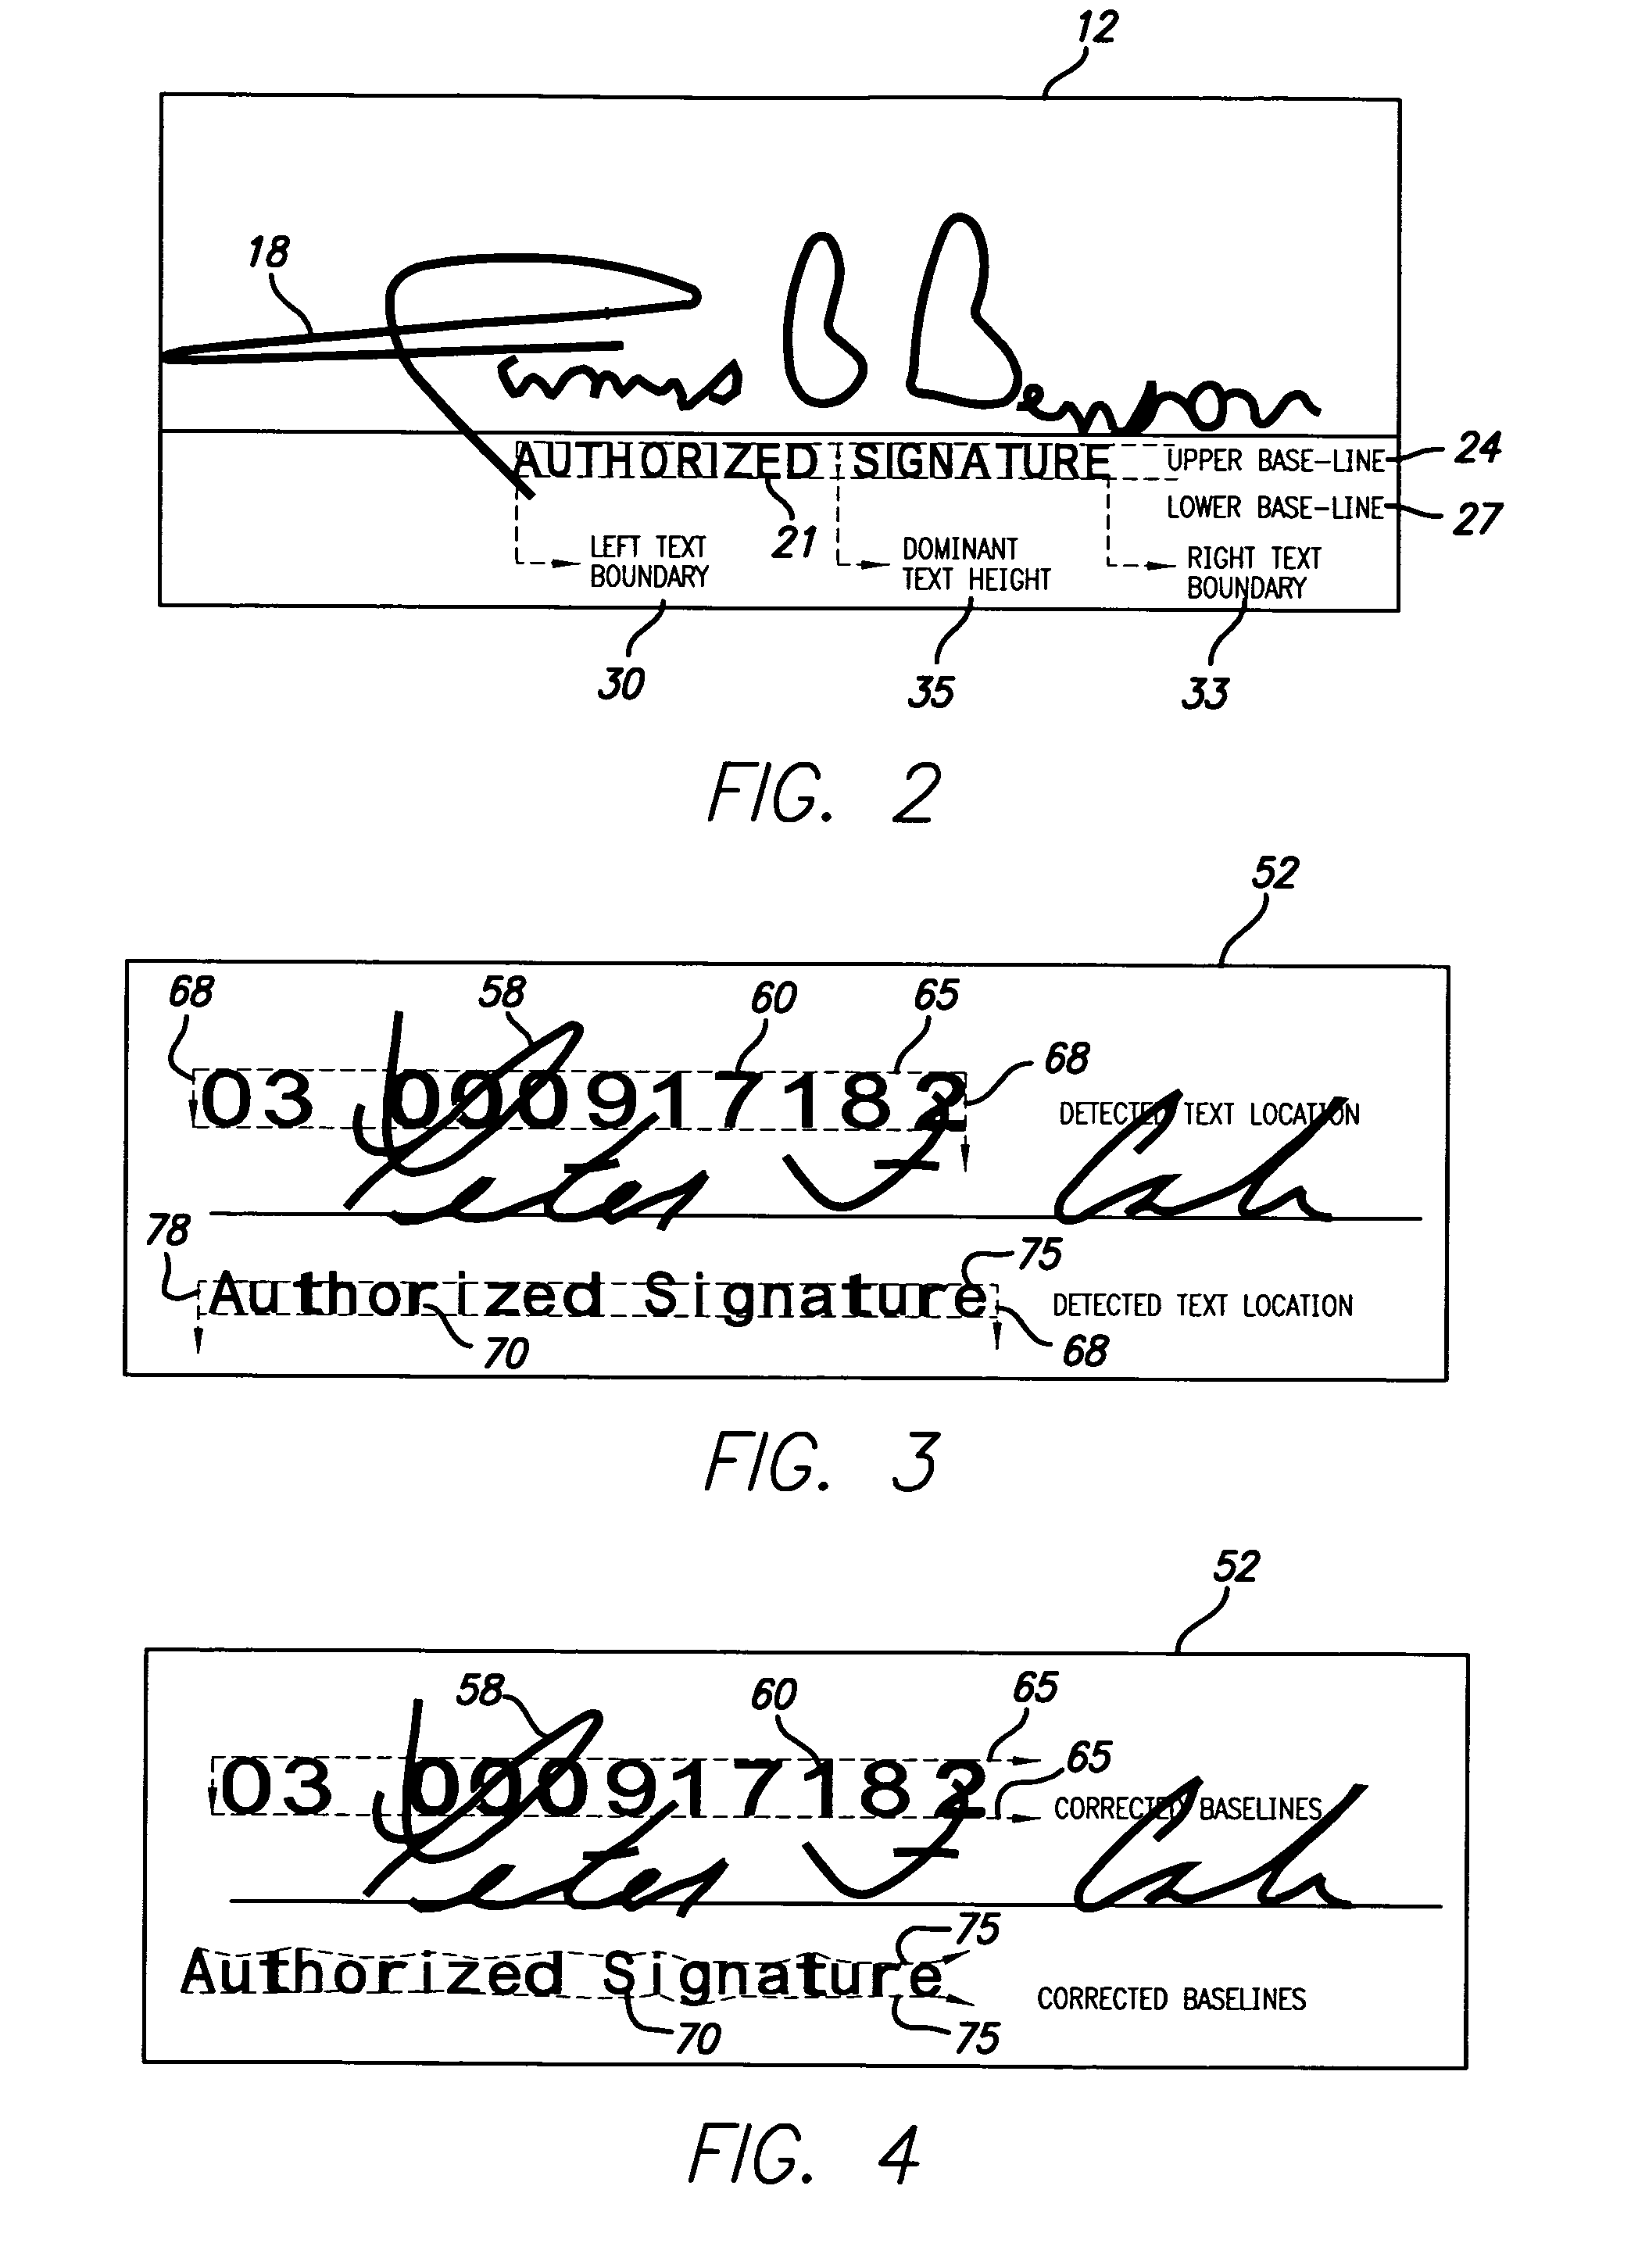 Method for automatic removal of text from a signature area